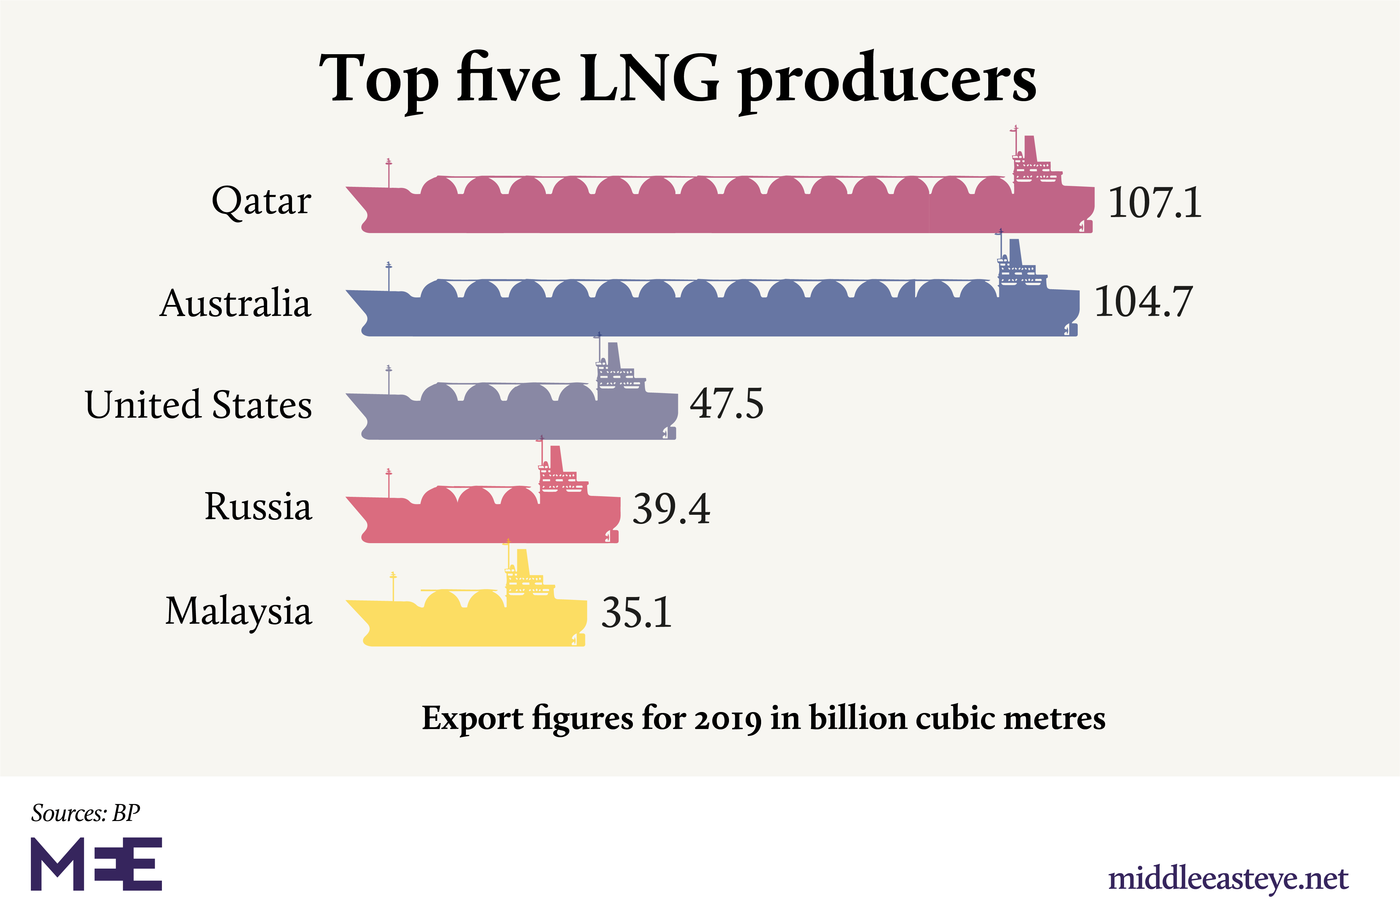 LNG producers